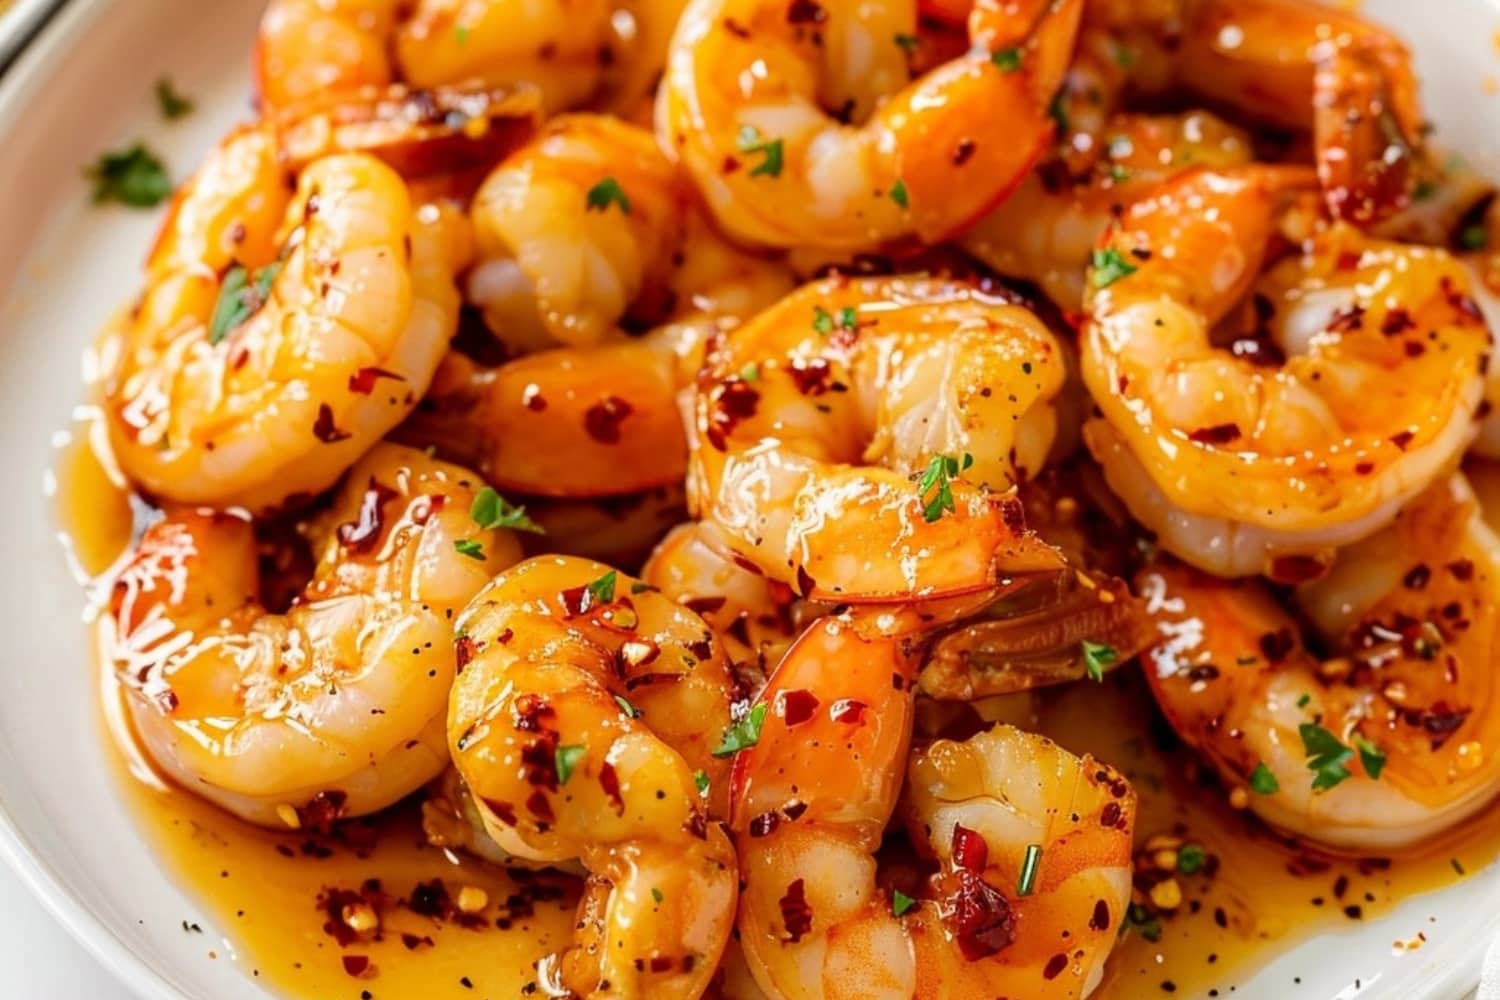 Honey garlic shrimp with pepper flakes served on a white plate.